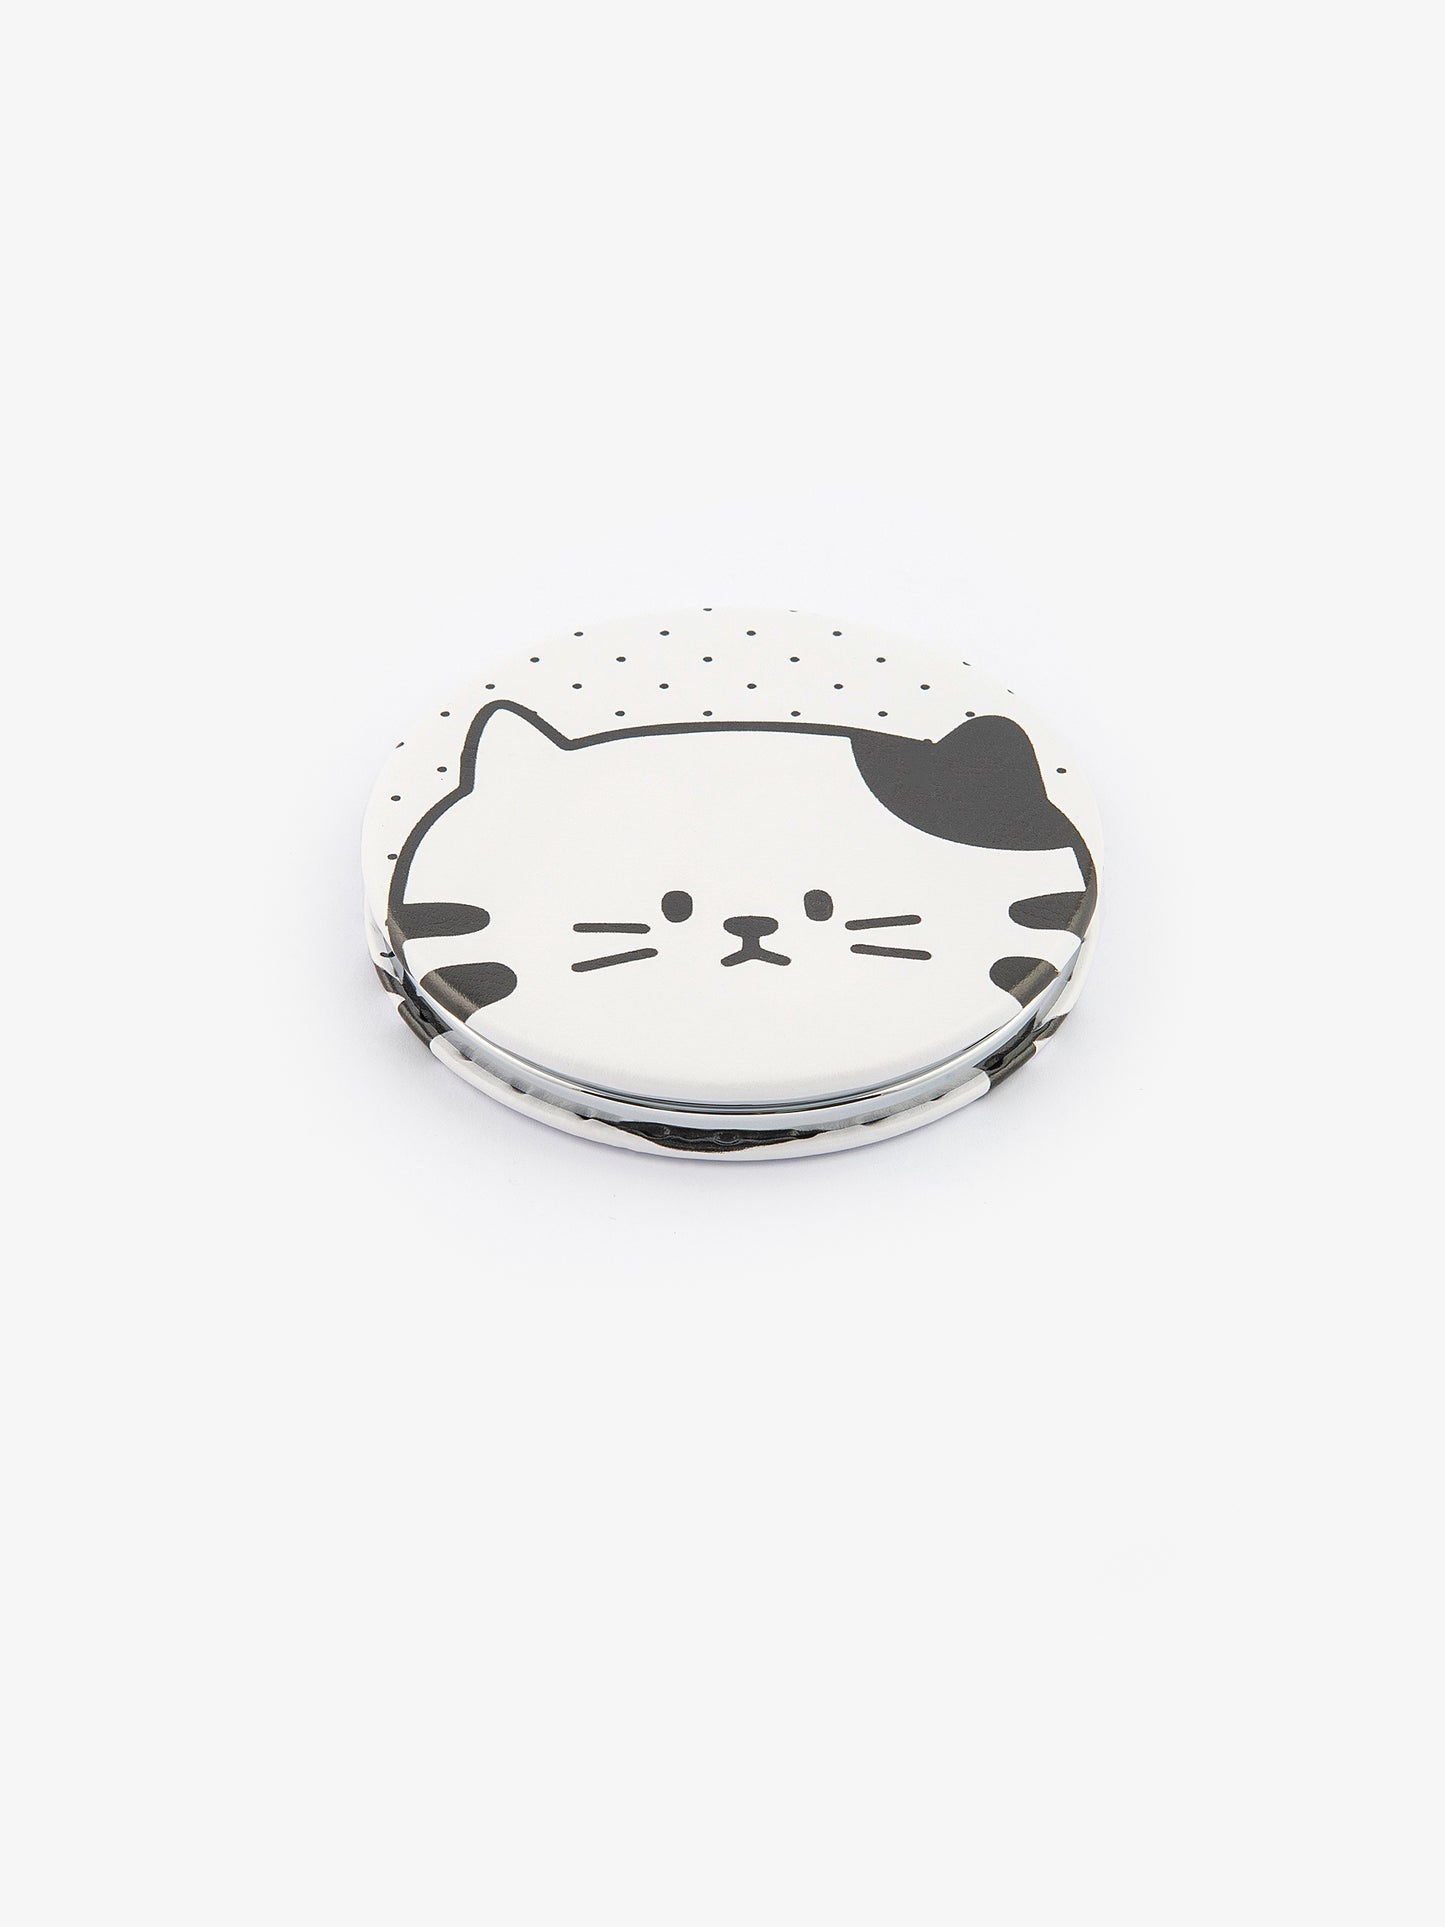 Animated Compact Mirror